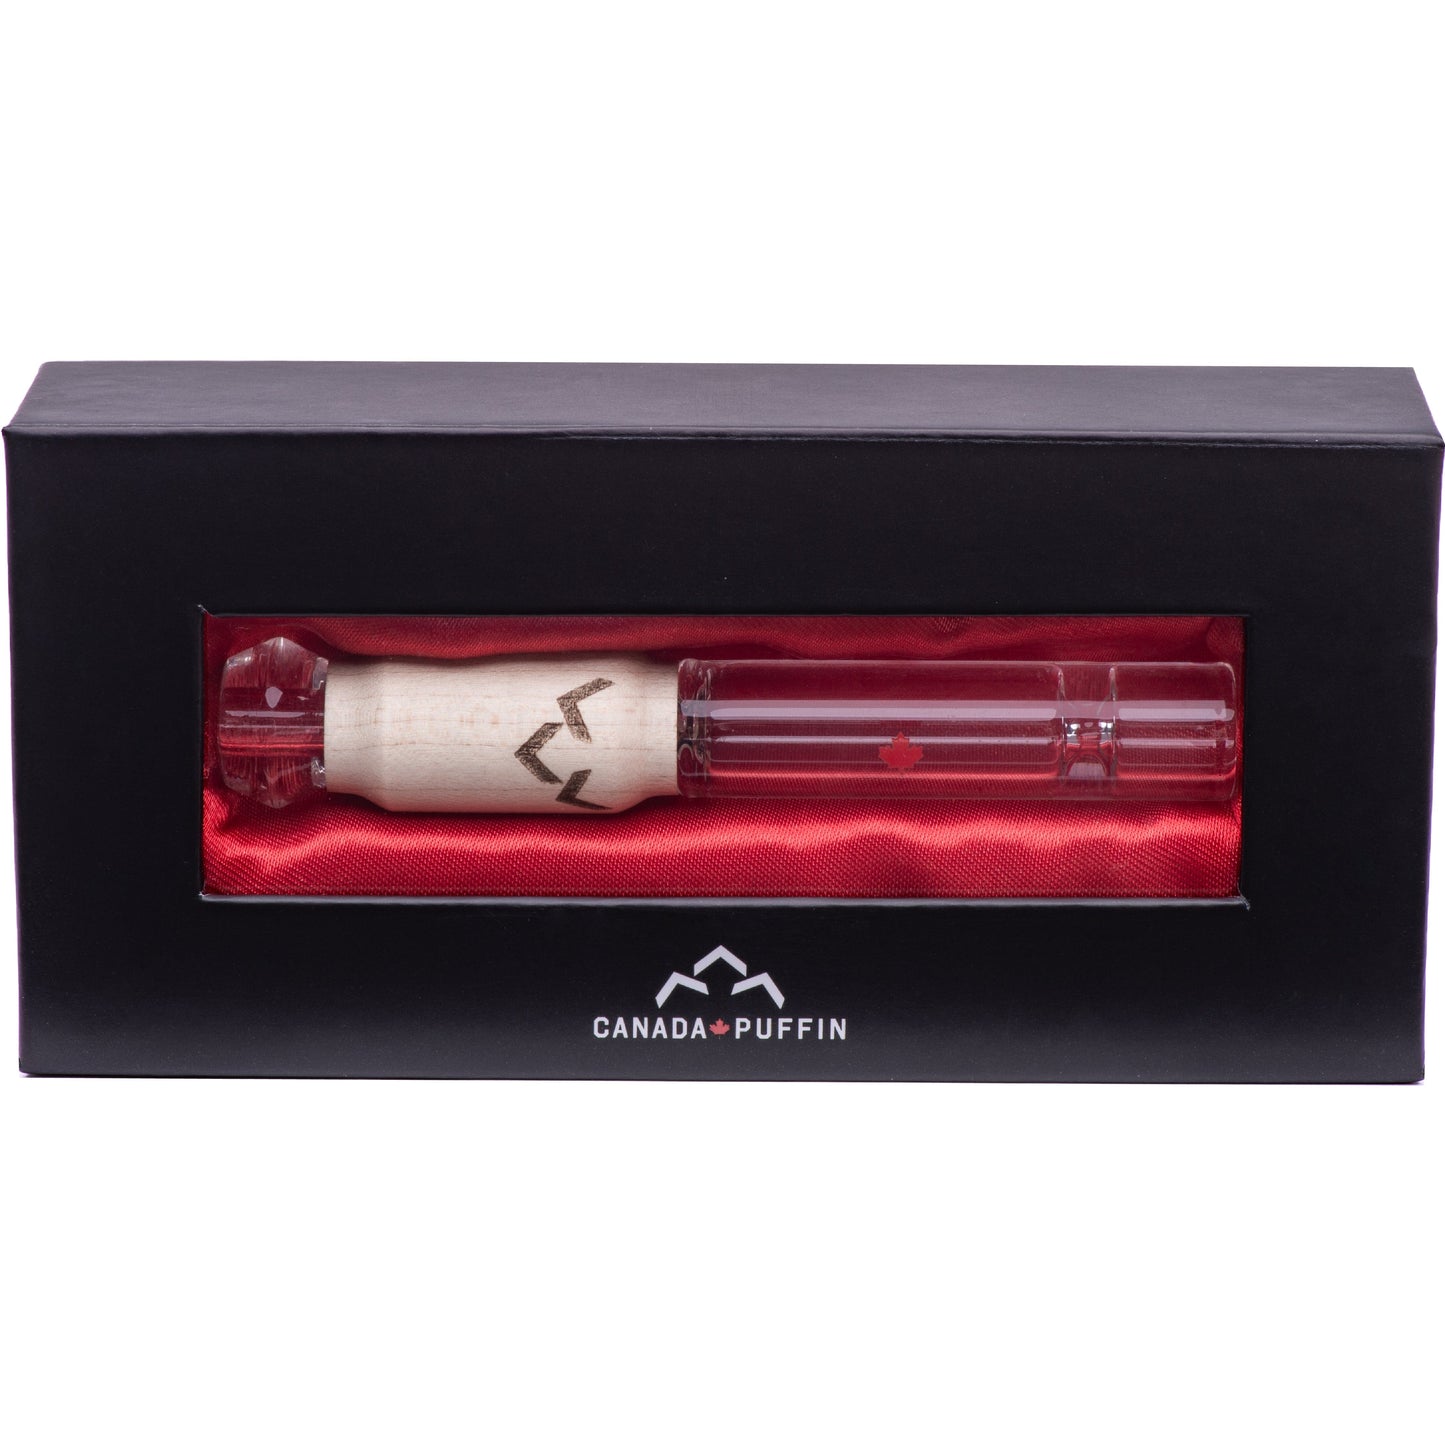 Canada Puffin Hand Pipe Northern Lights Taster Pipe and Case Bundle